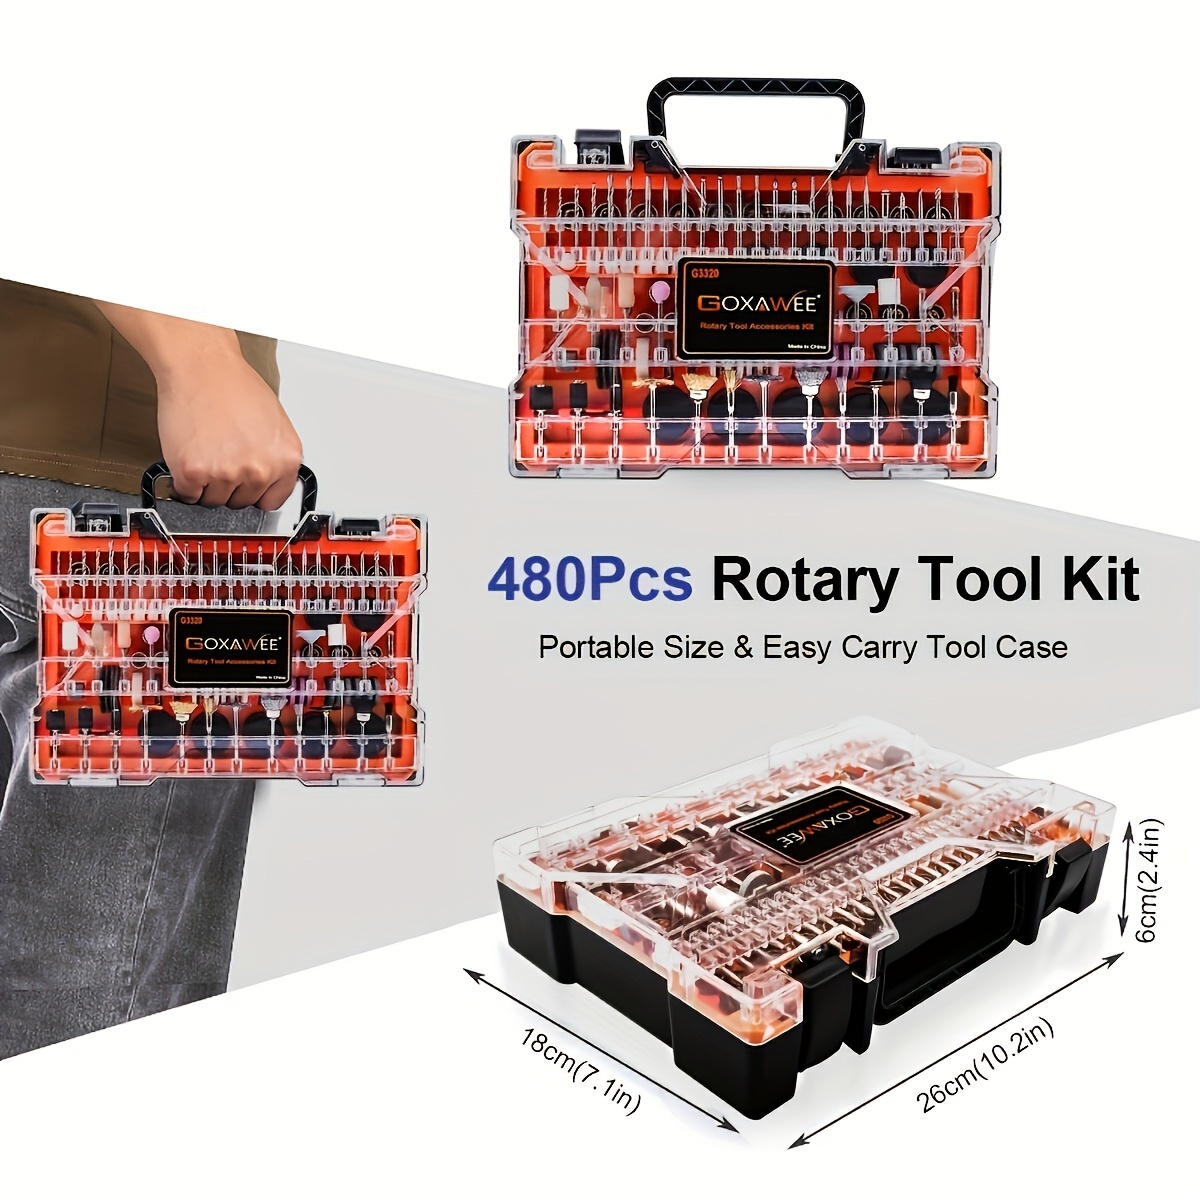 

480pcs Rotary Tool Accessories Kit, 1/8 Inch Shank Rotary Tool Accessory Set, Multi Purpose Universal Kit For Cutting, Drilling, Grinding, Polishing, Engraving & Sanding